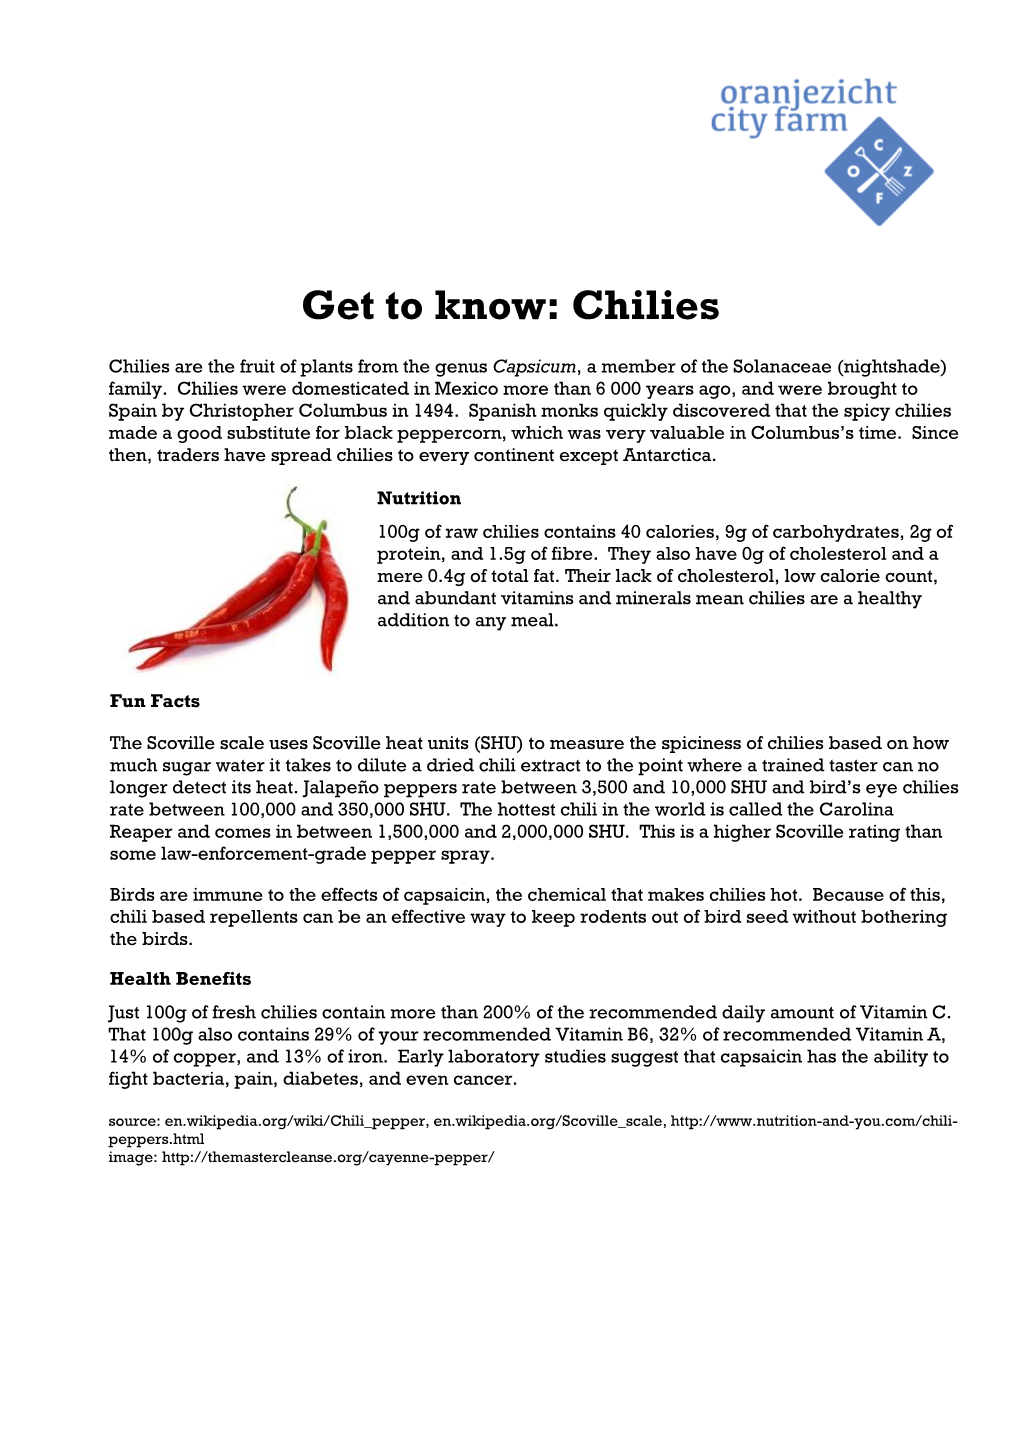 Get to Know: Chilies